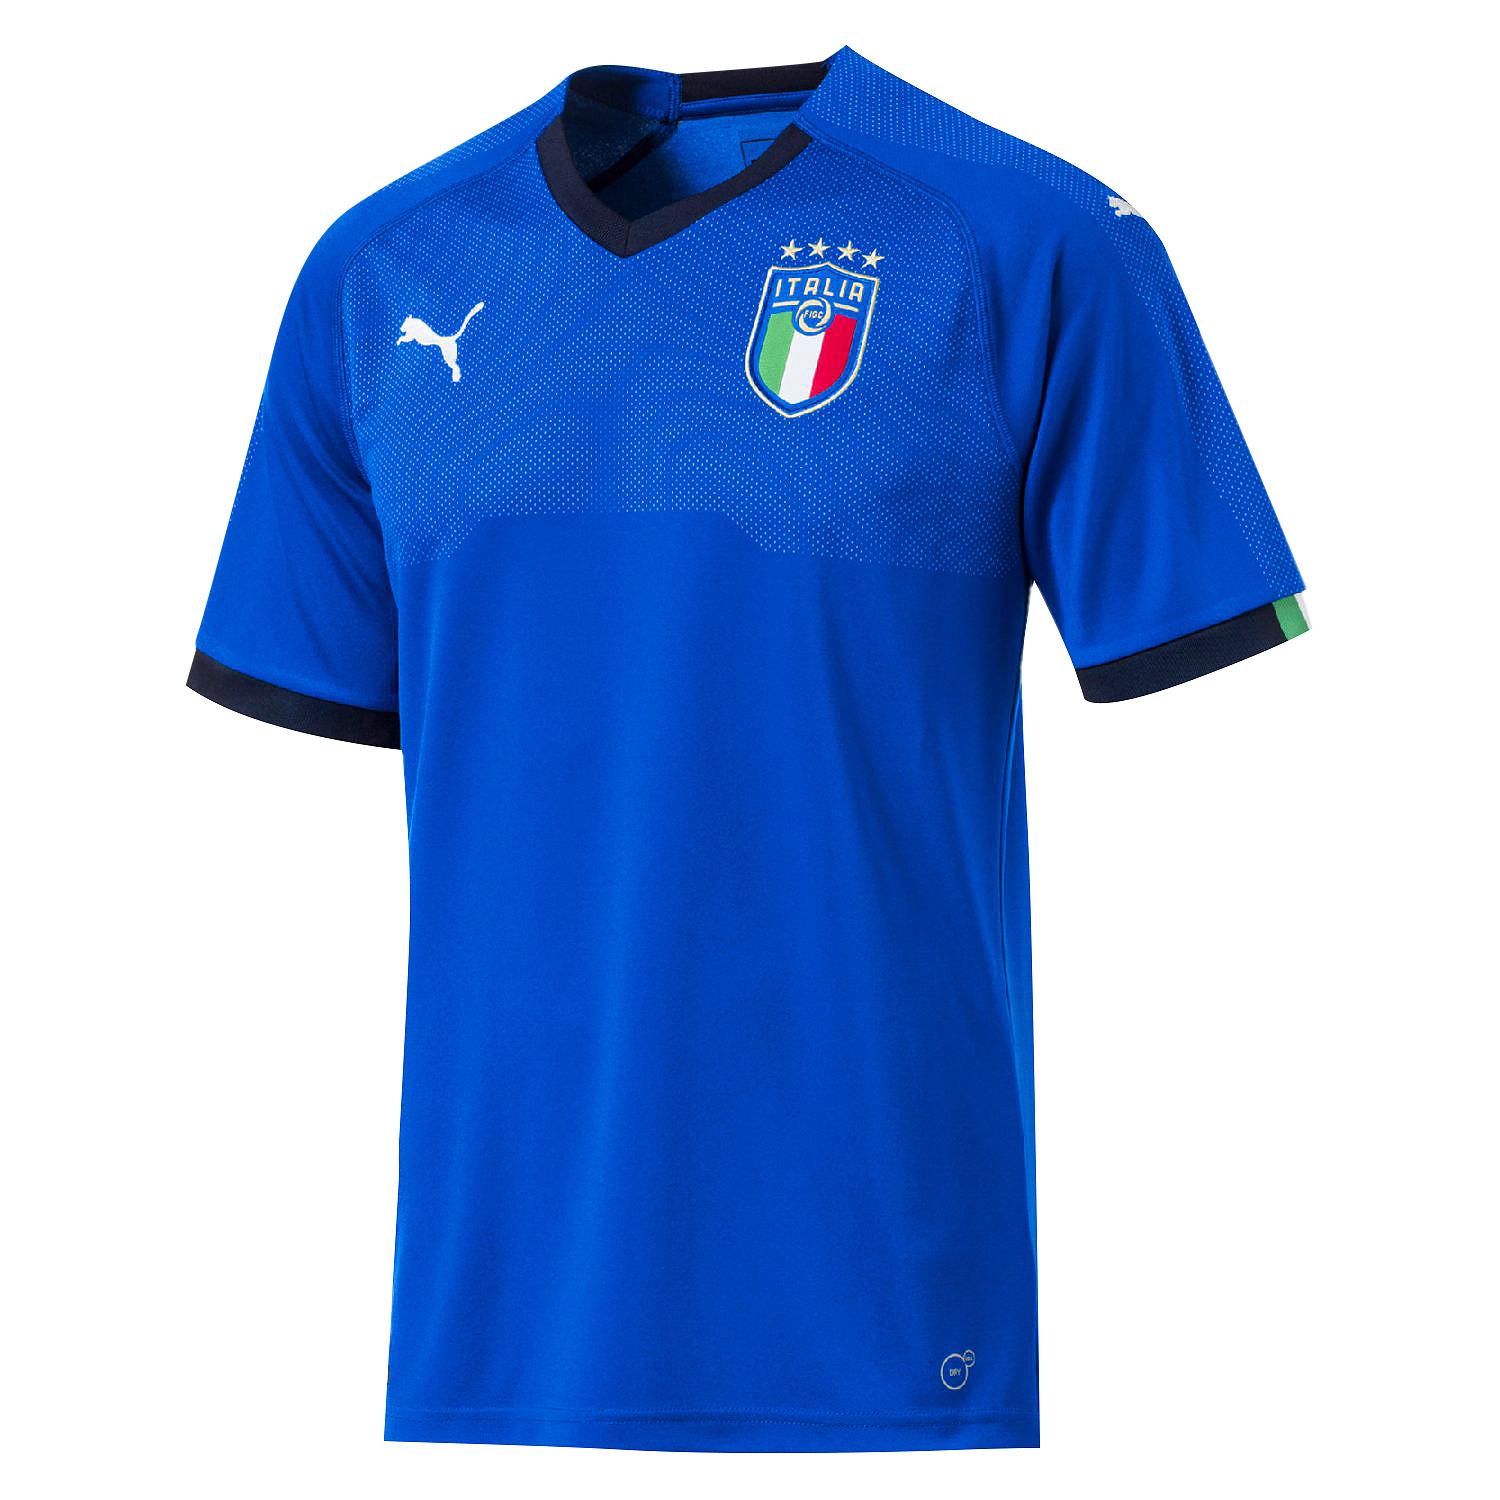 Italy FIFA World Cup 2018 Home Jersey 